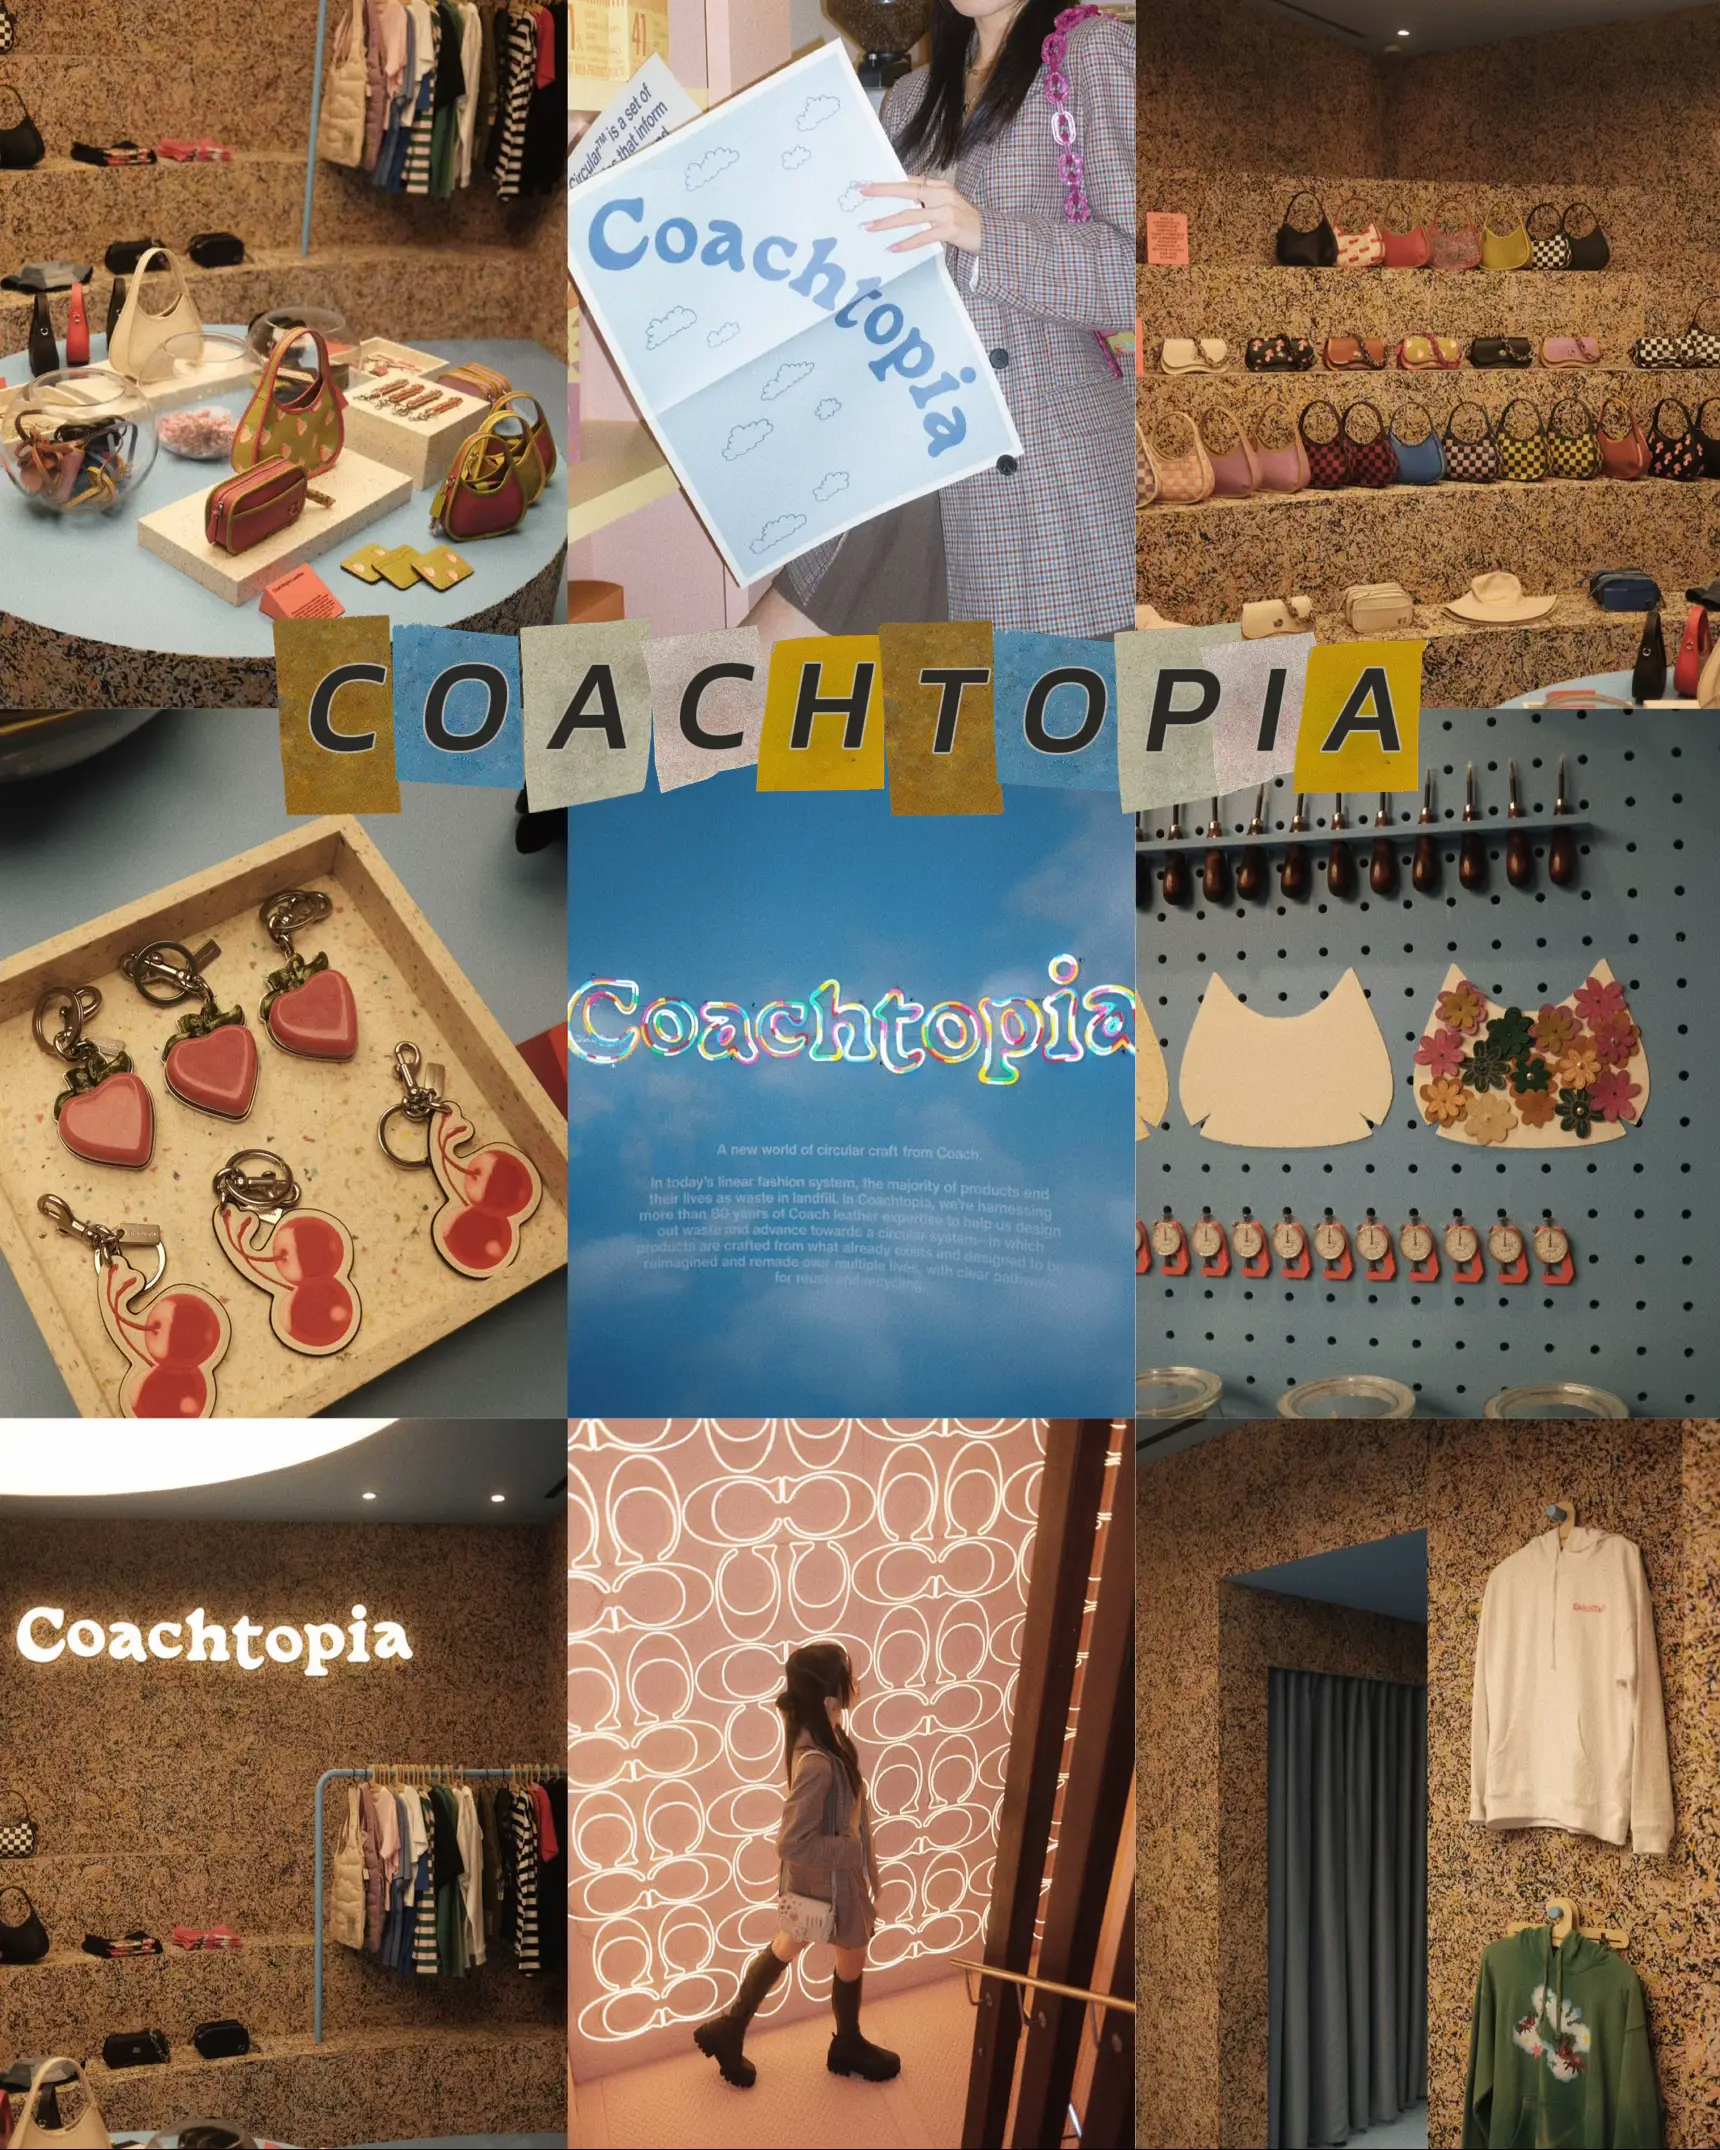 The Story Behind Coachtopia, Coach's New Vision for Circular